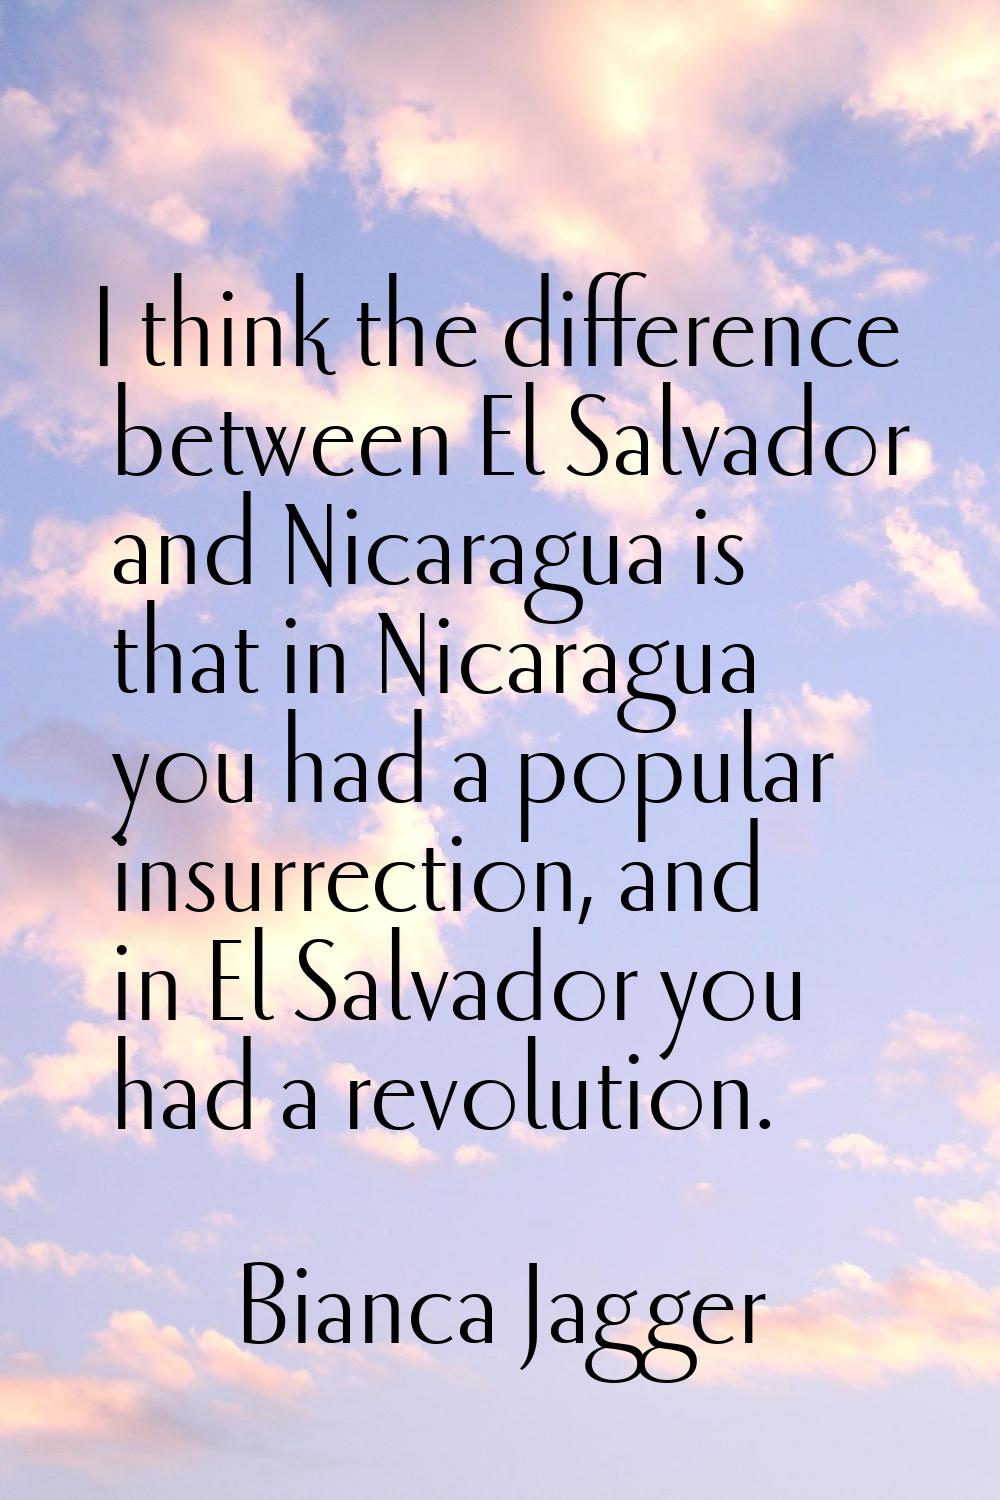 I think the difference between El Salvador and Nicaragua is that in Nicaragua you had a popular ins